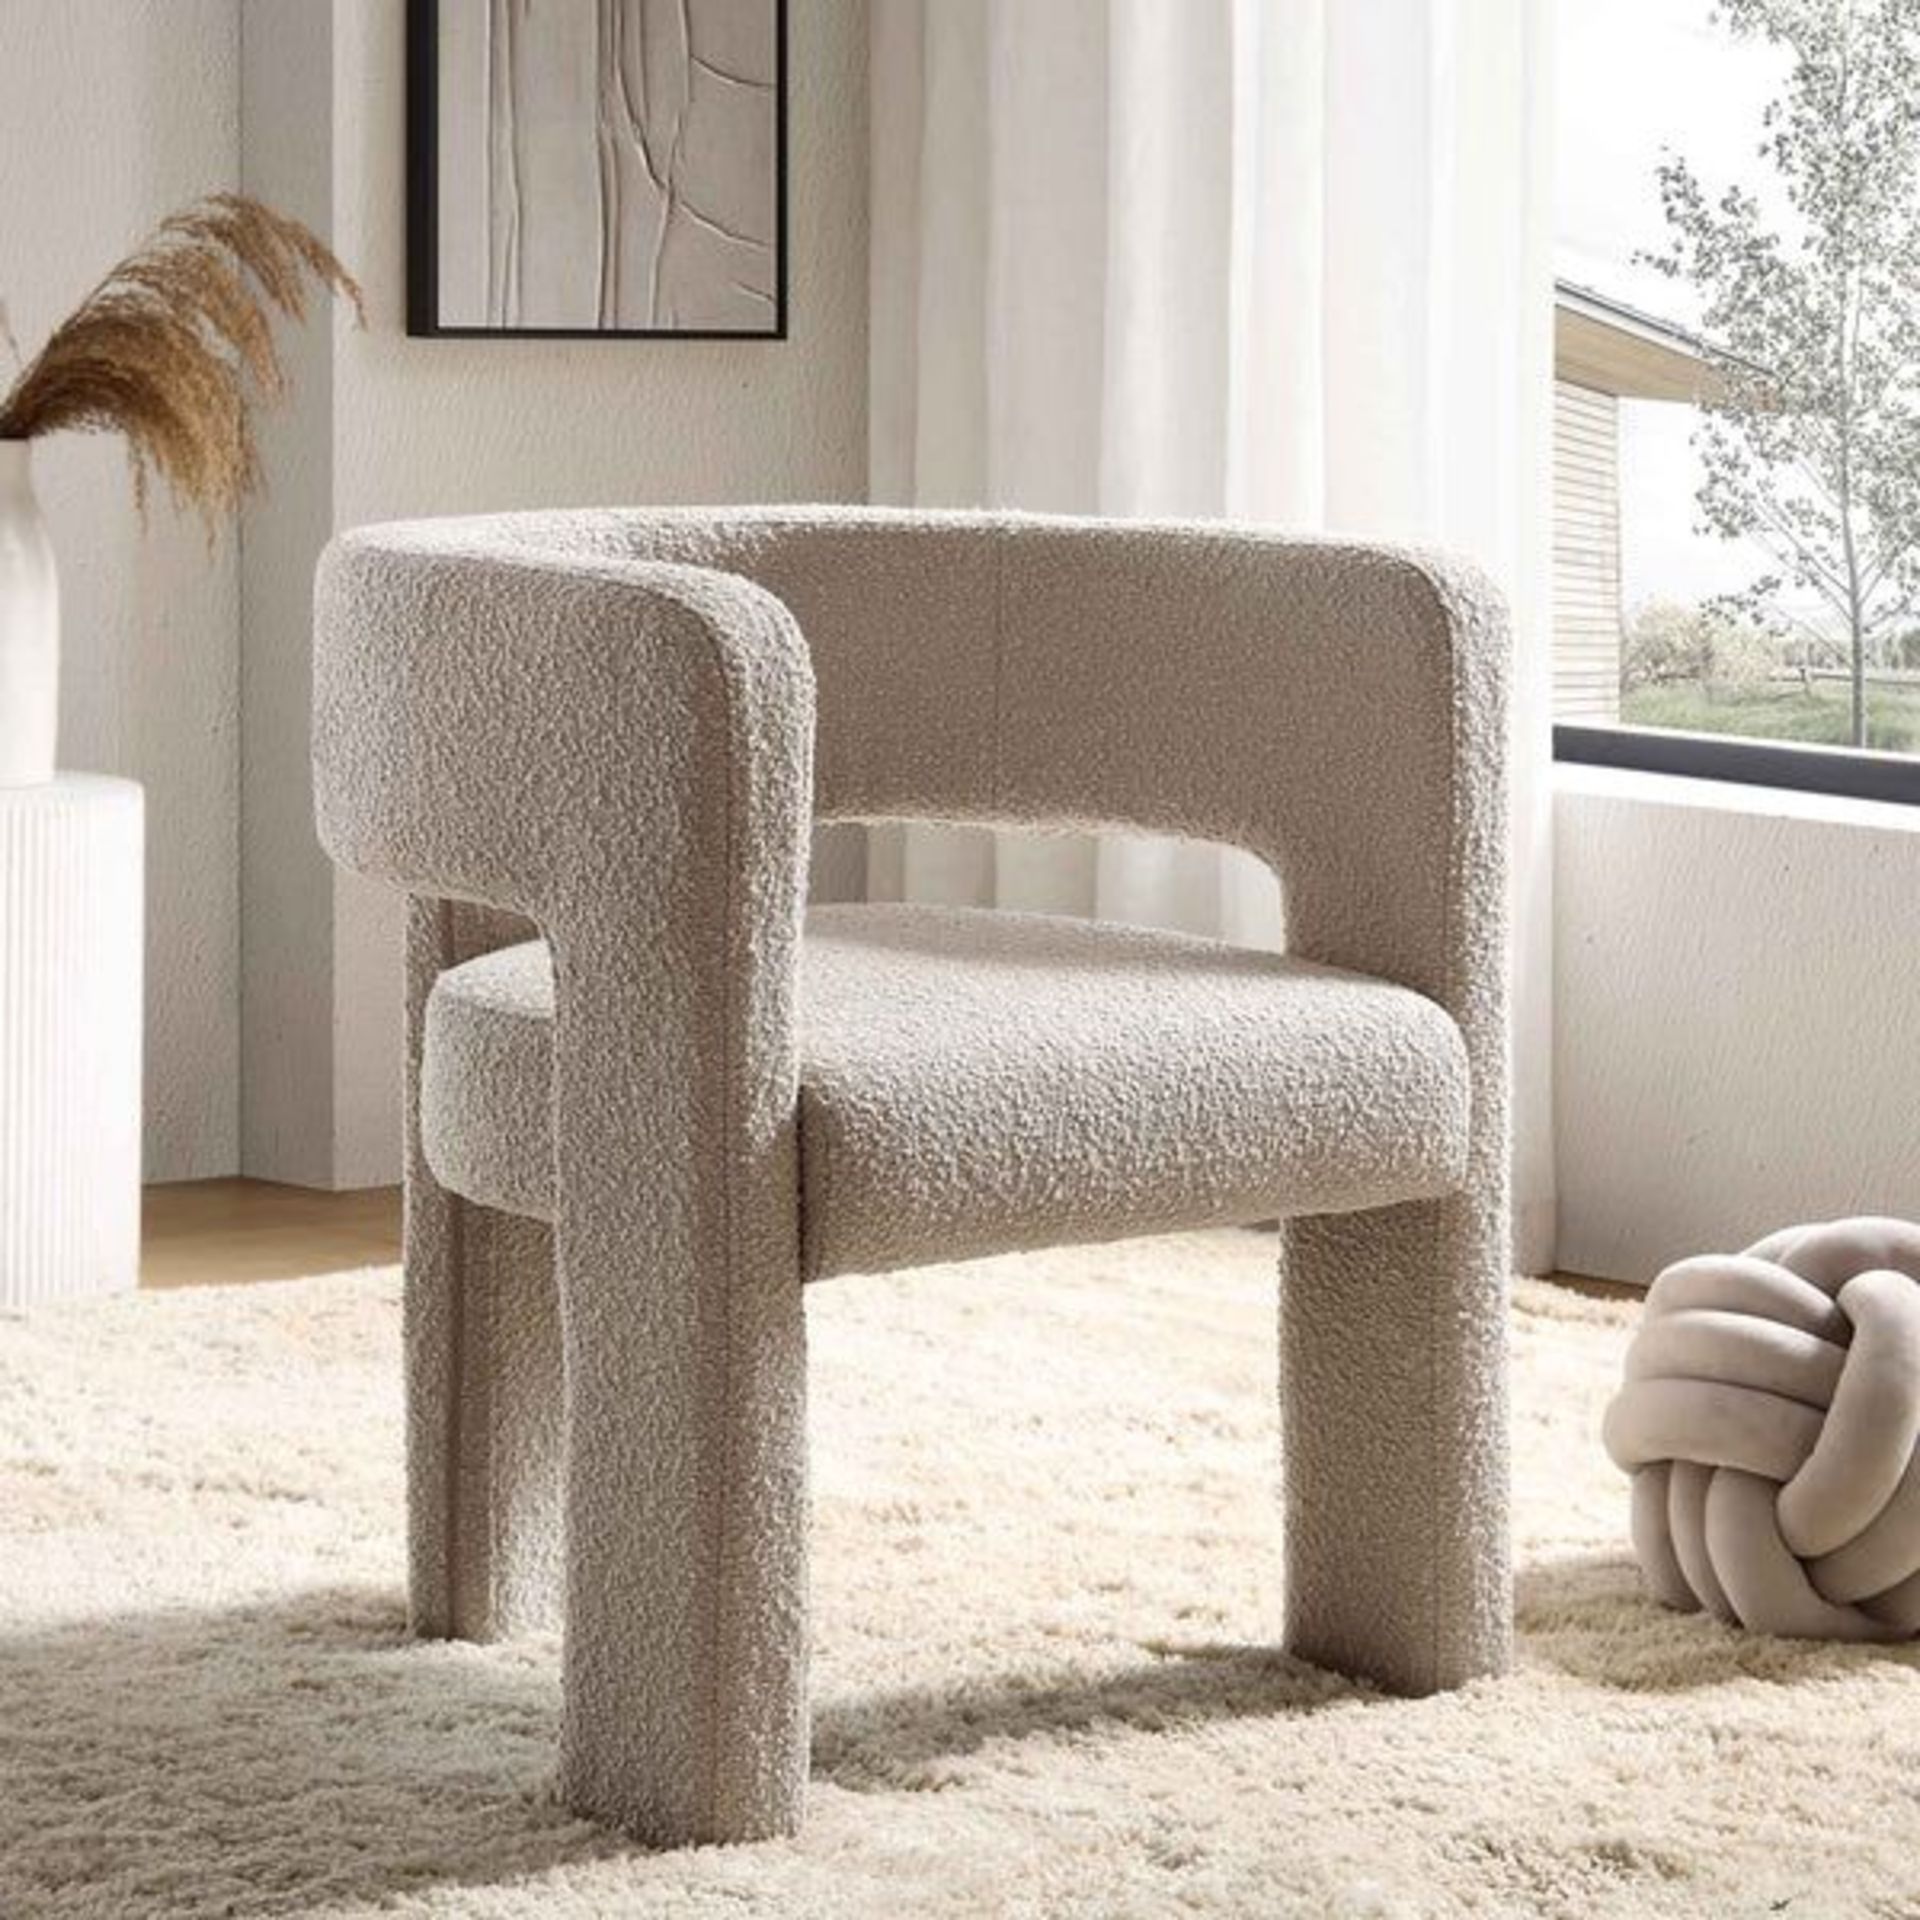 Greenwich Light Taupe Boucle Dining Chair. - ER30. RRP £219.99. Our beautiful Greenwich chair - Image 2 of 2